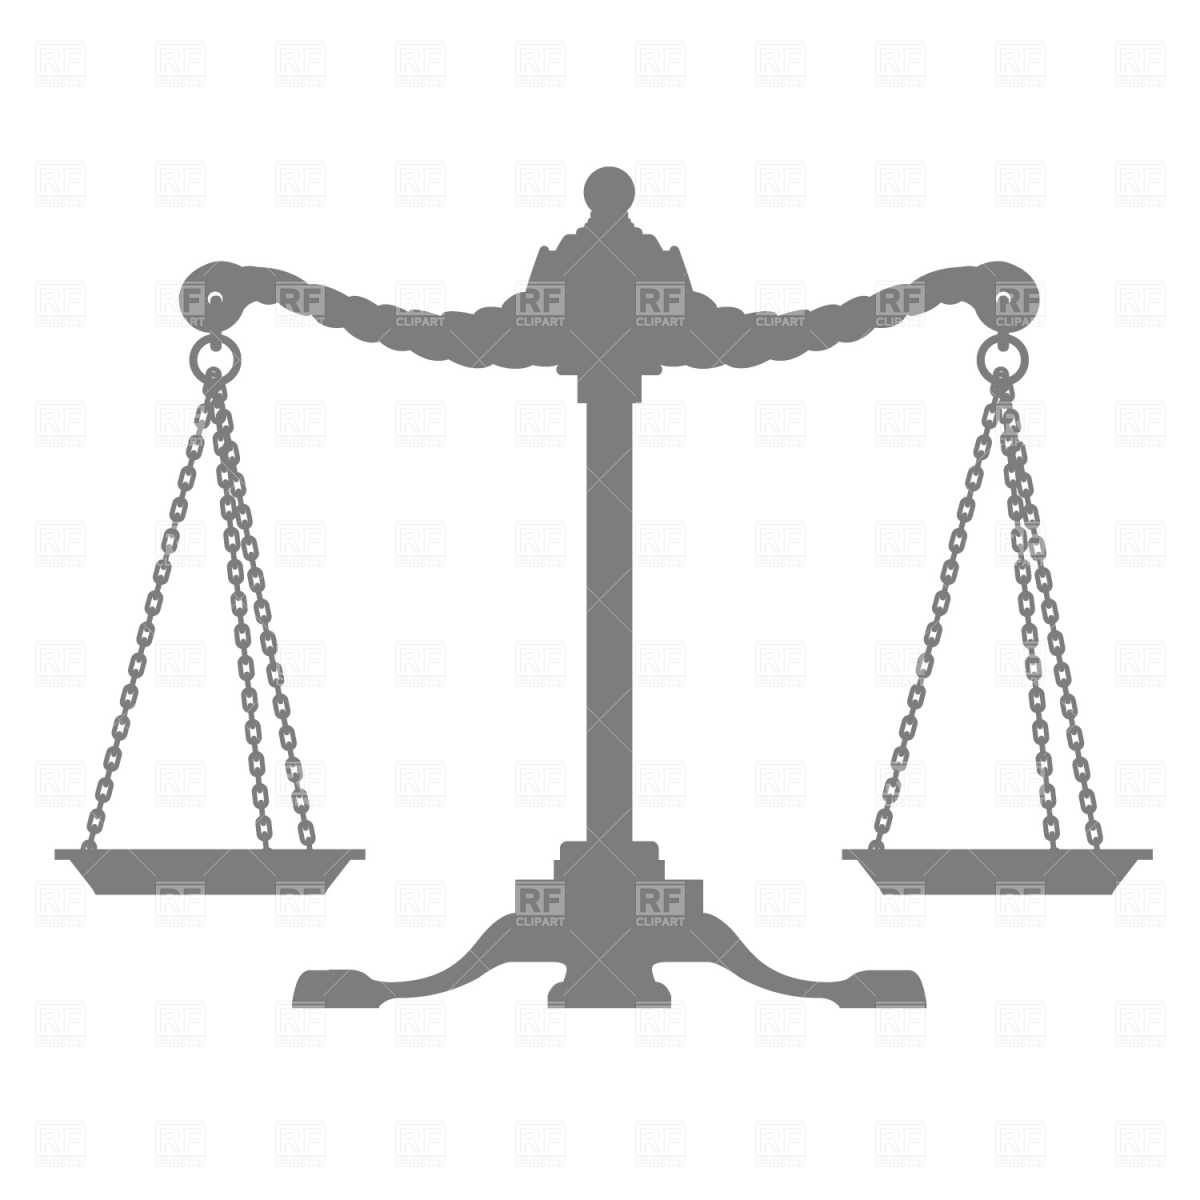 Scales Of Justice Silhouette Download Royalty Free Vector Clipart